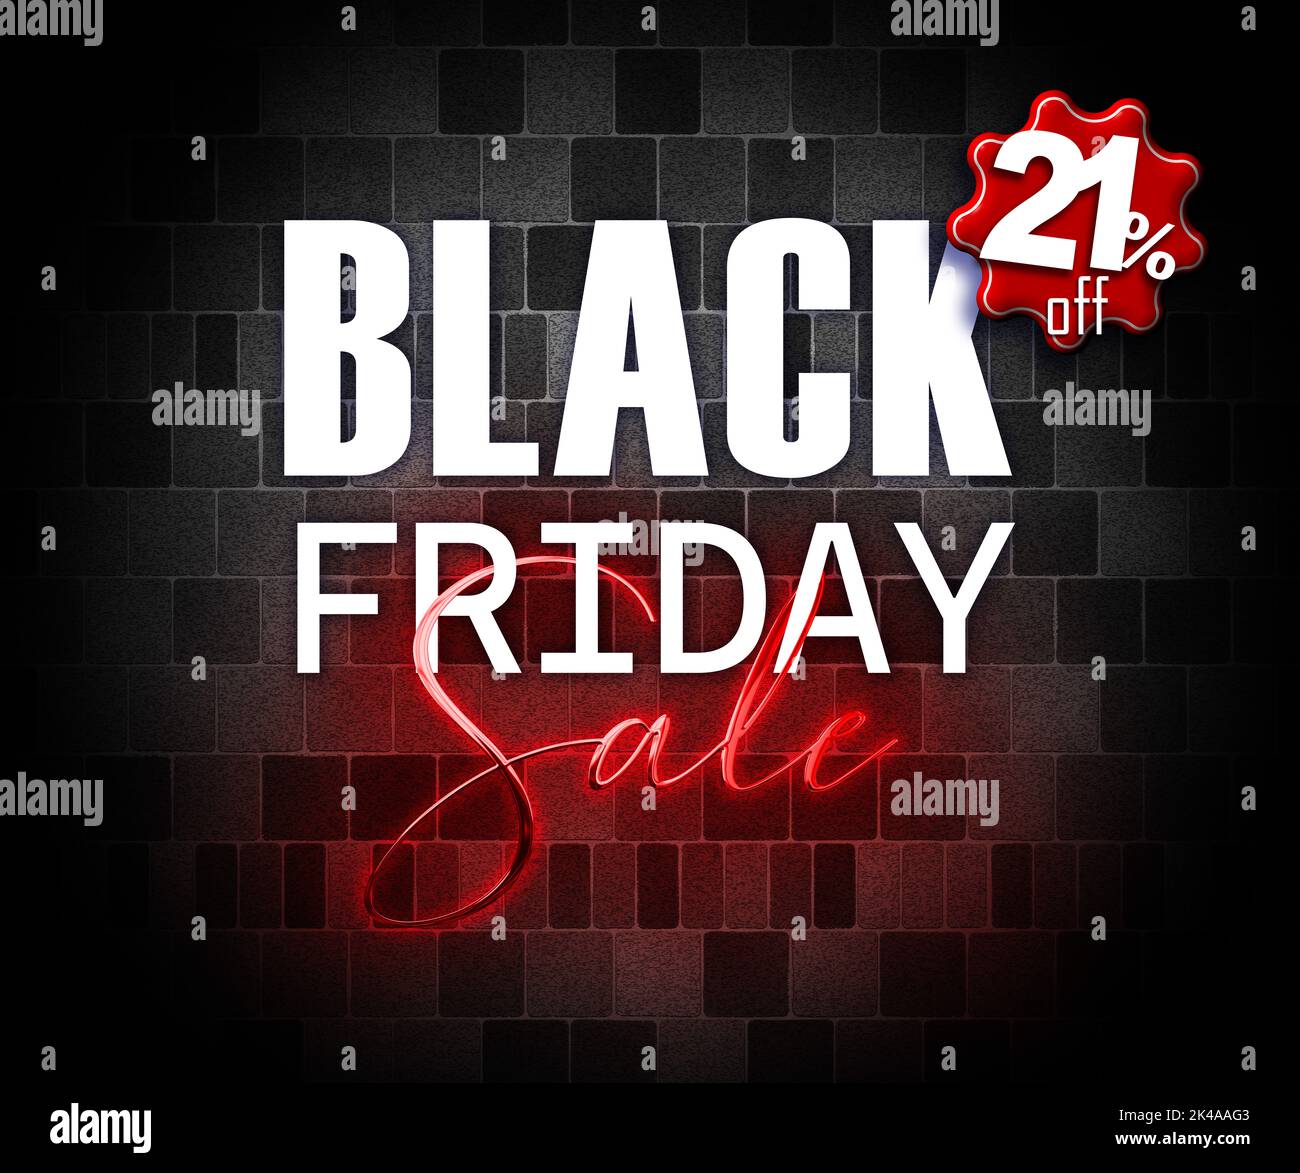 illustration with 3d elements black friday promotion banner 21 percent off sales increase Stock Photo